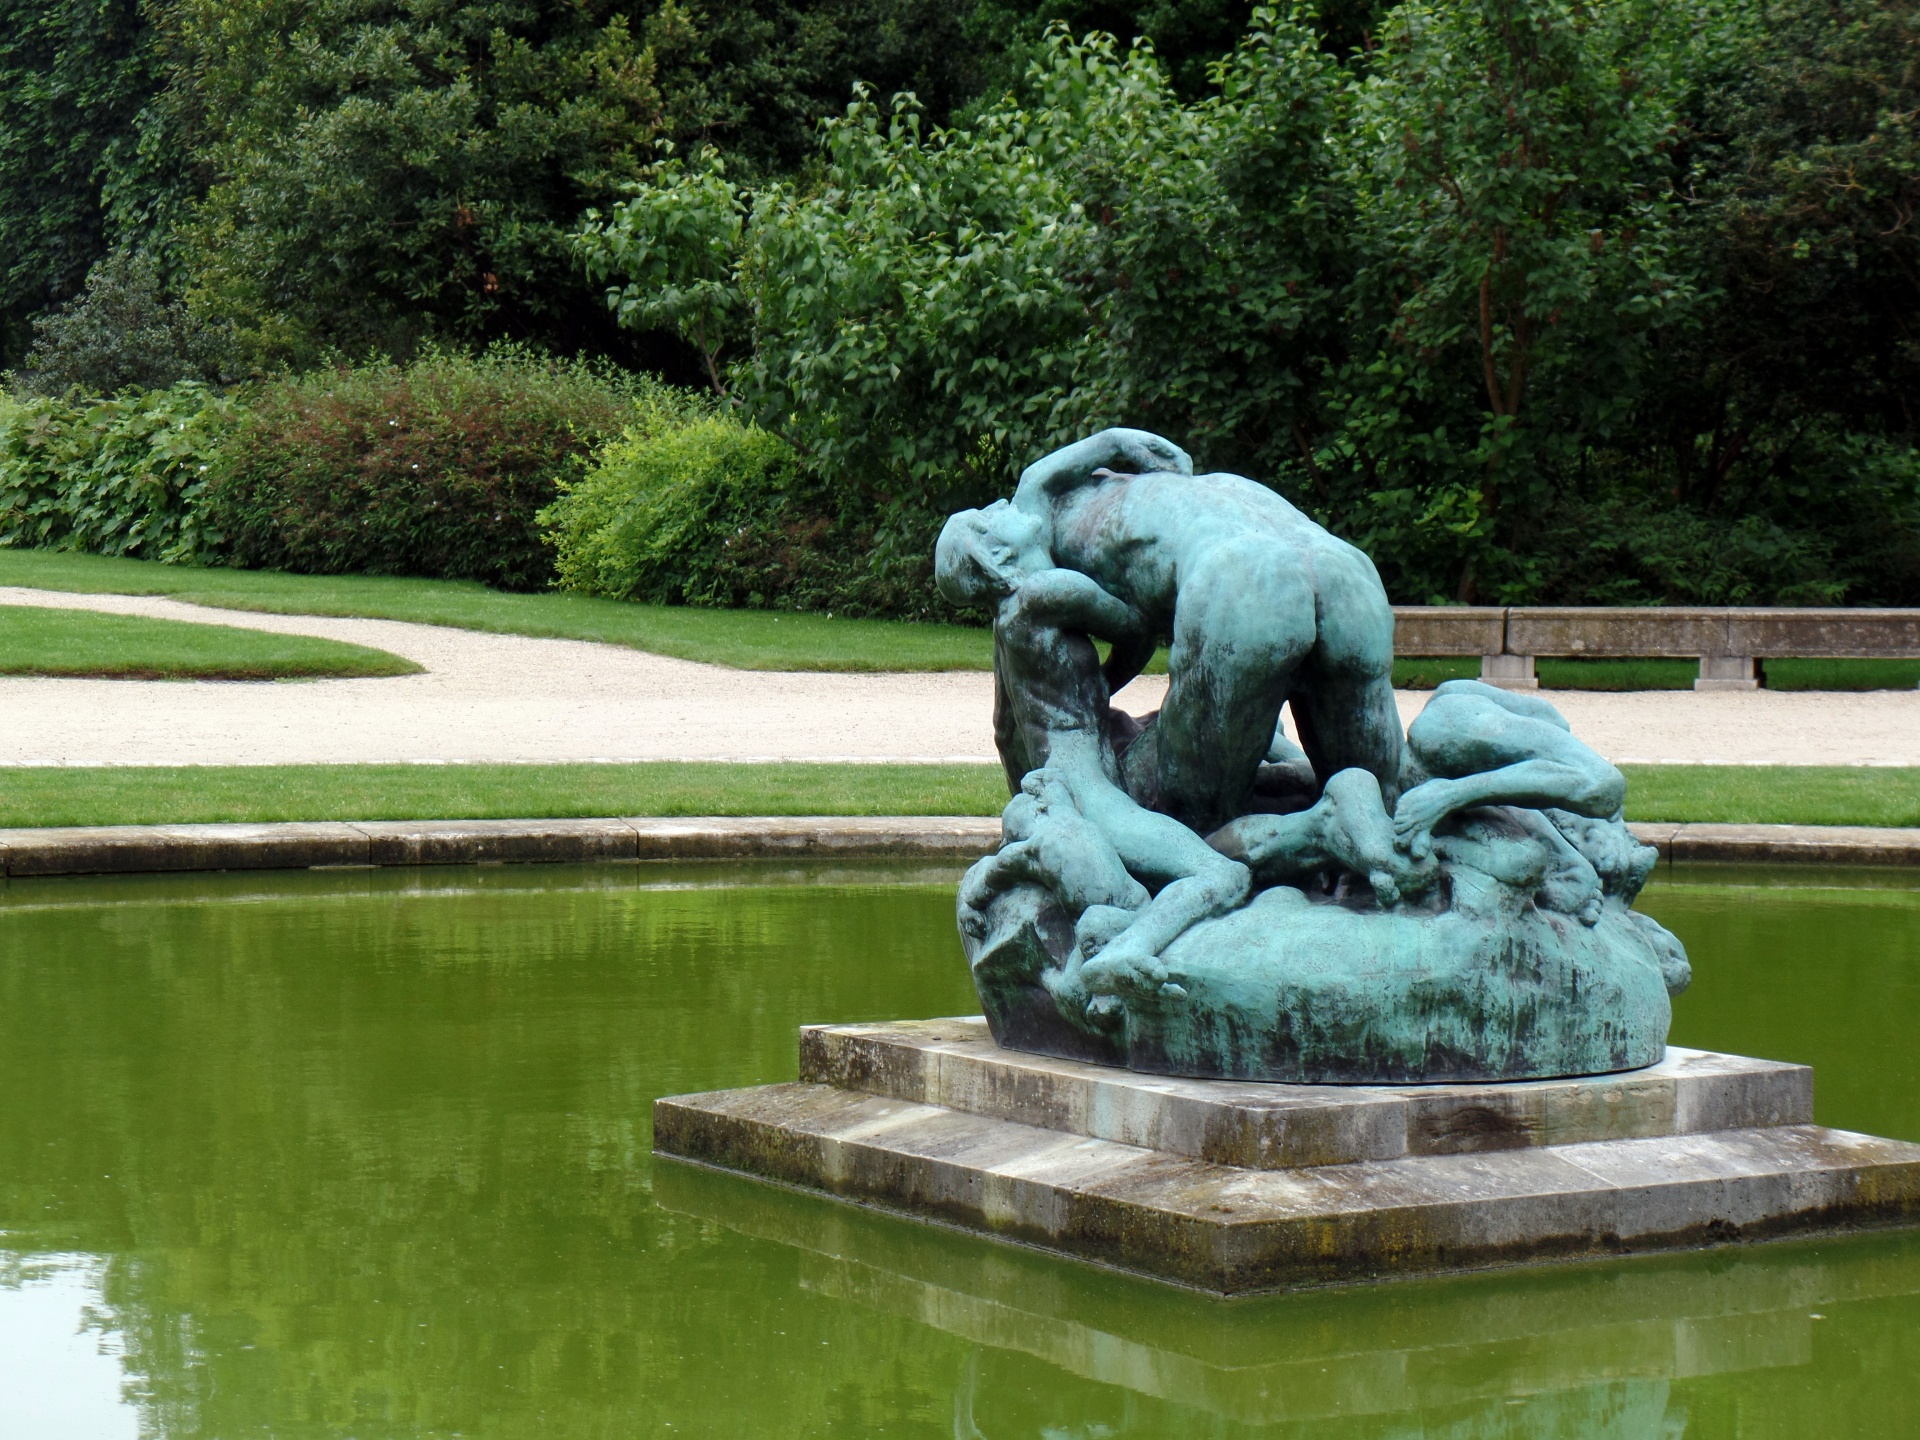 A bronze statue by Rodin in the middle of a pond